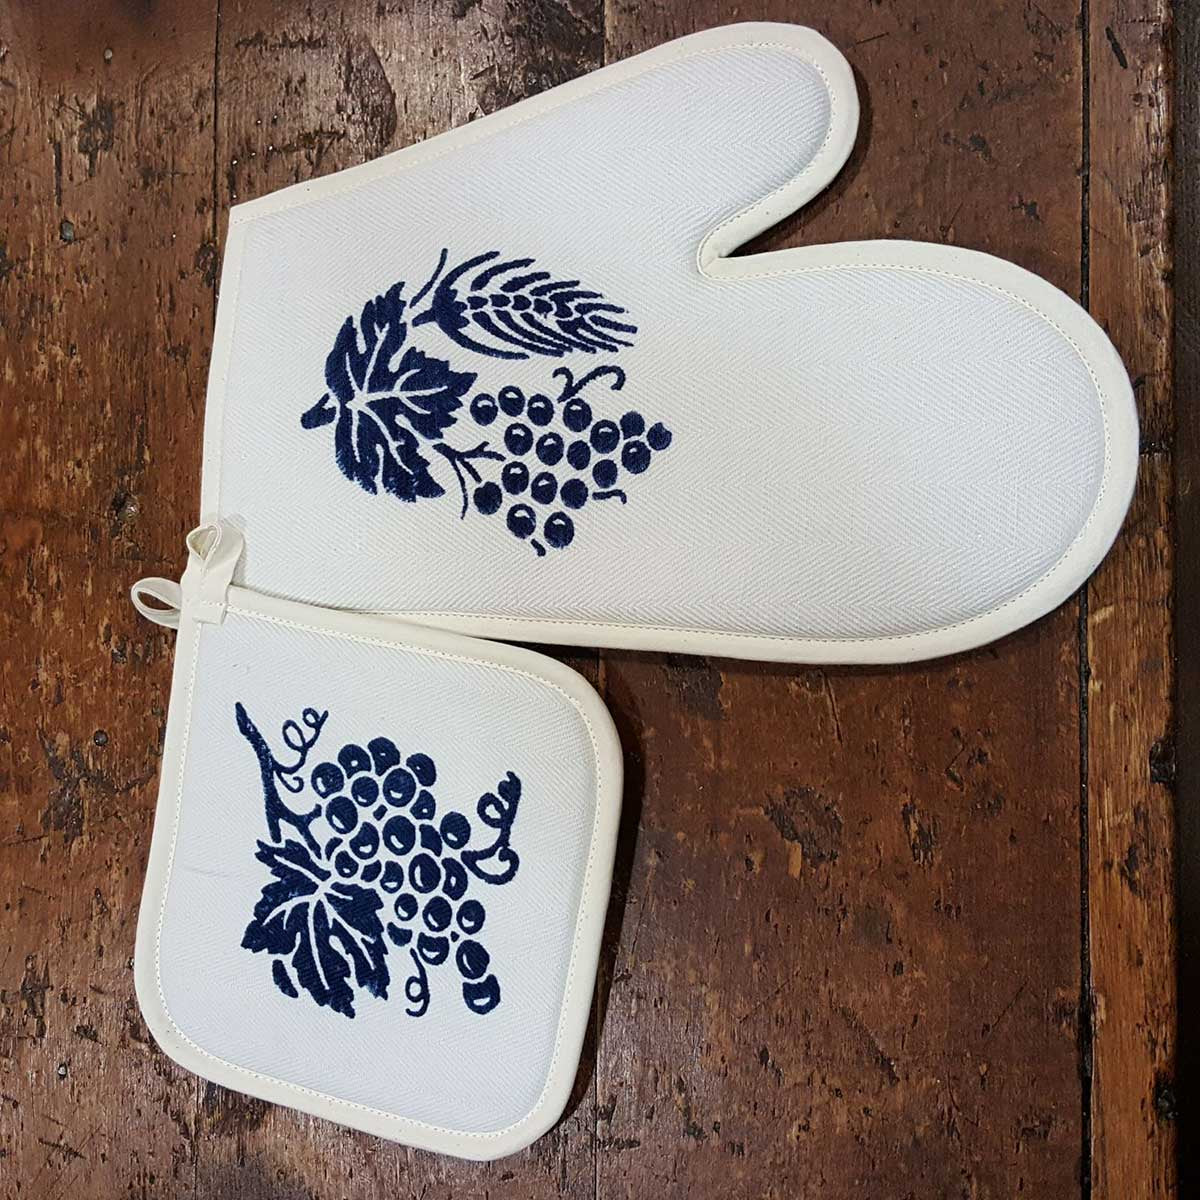 Pot holder and kitchen glove with Romagna prints